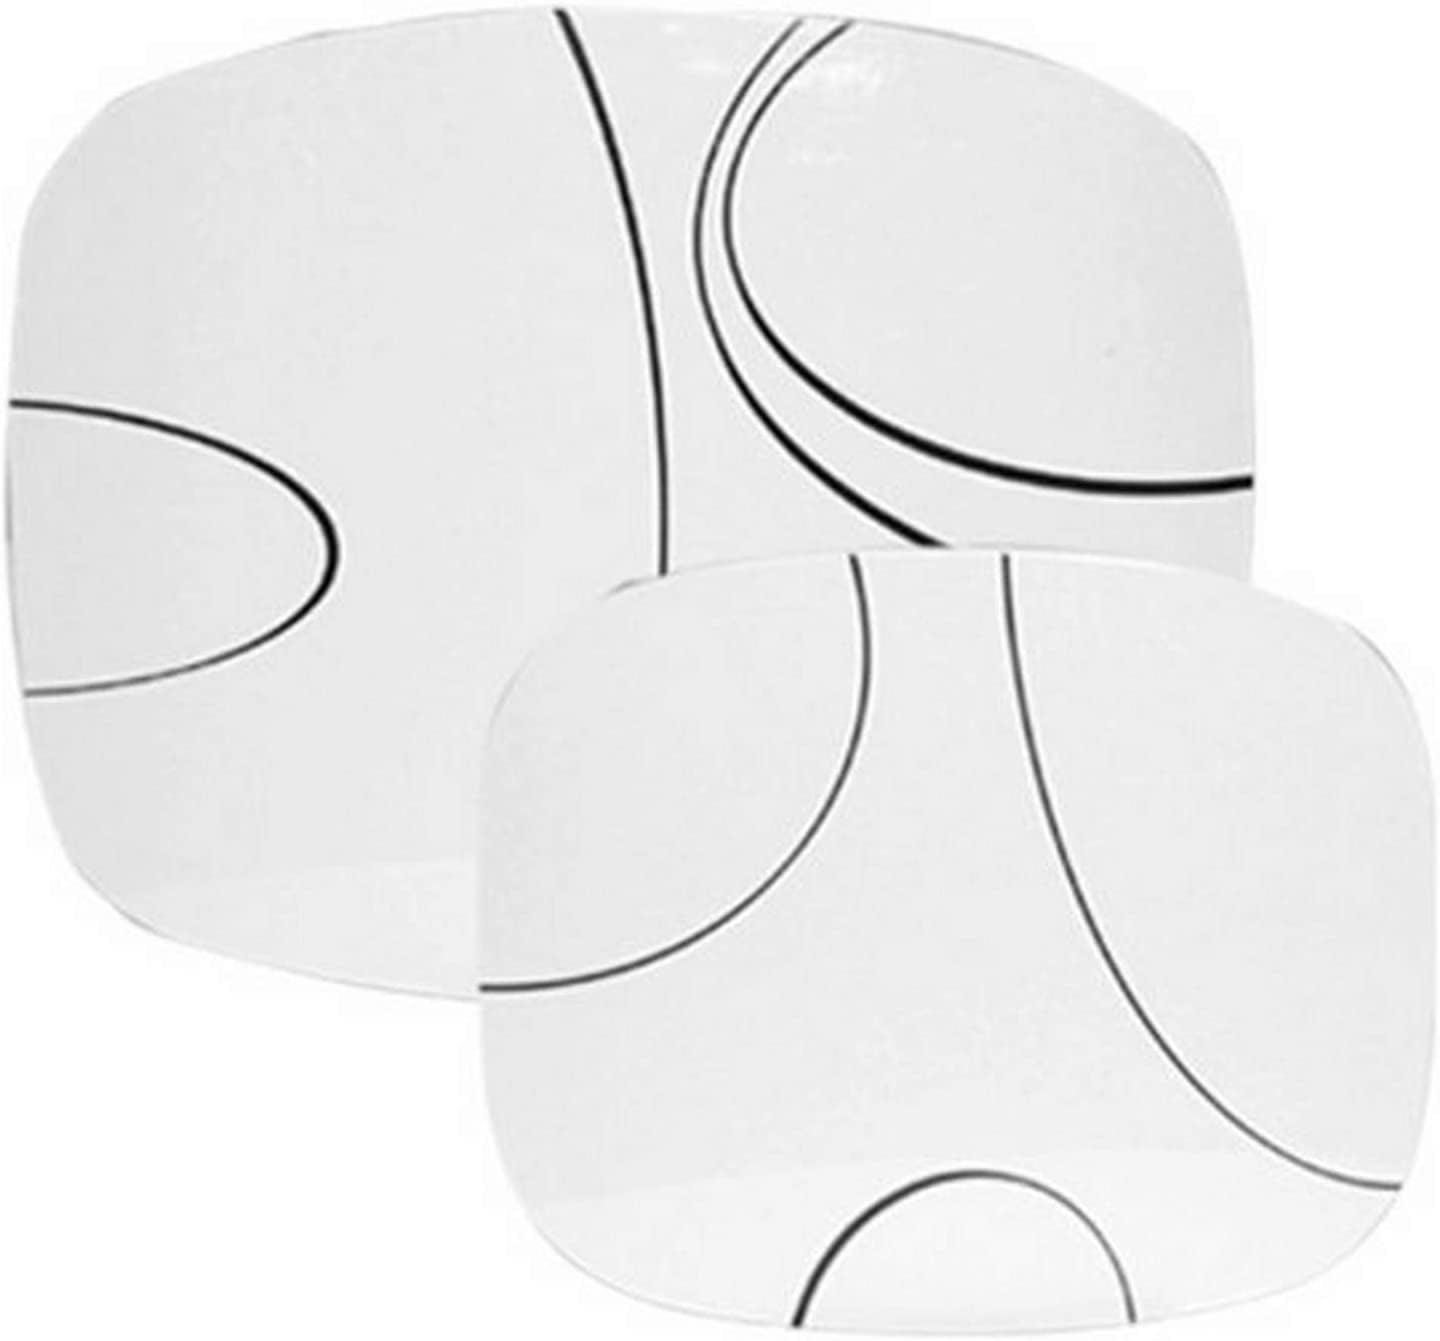 NEW Corelle Counter Stove Mat Set of 2 